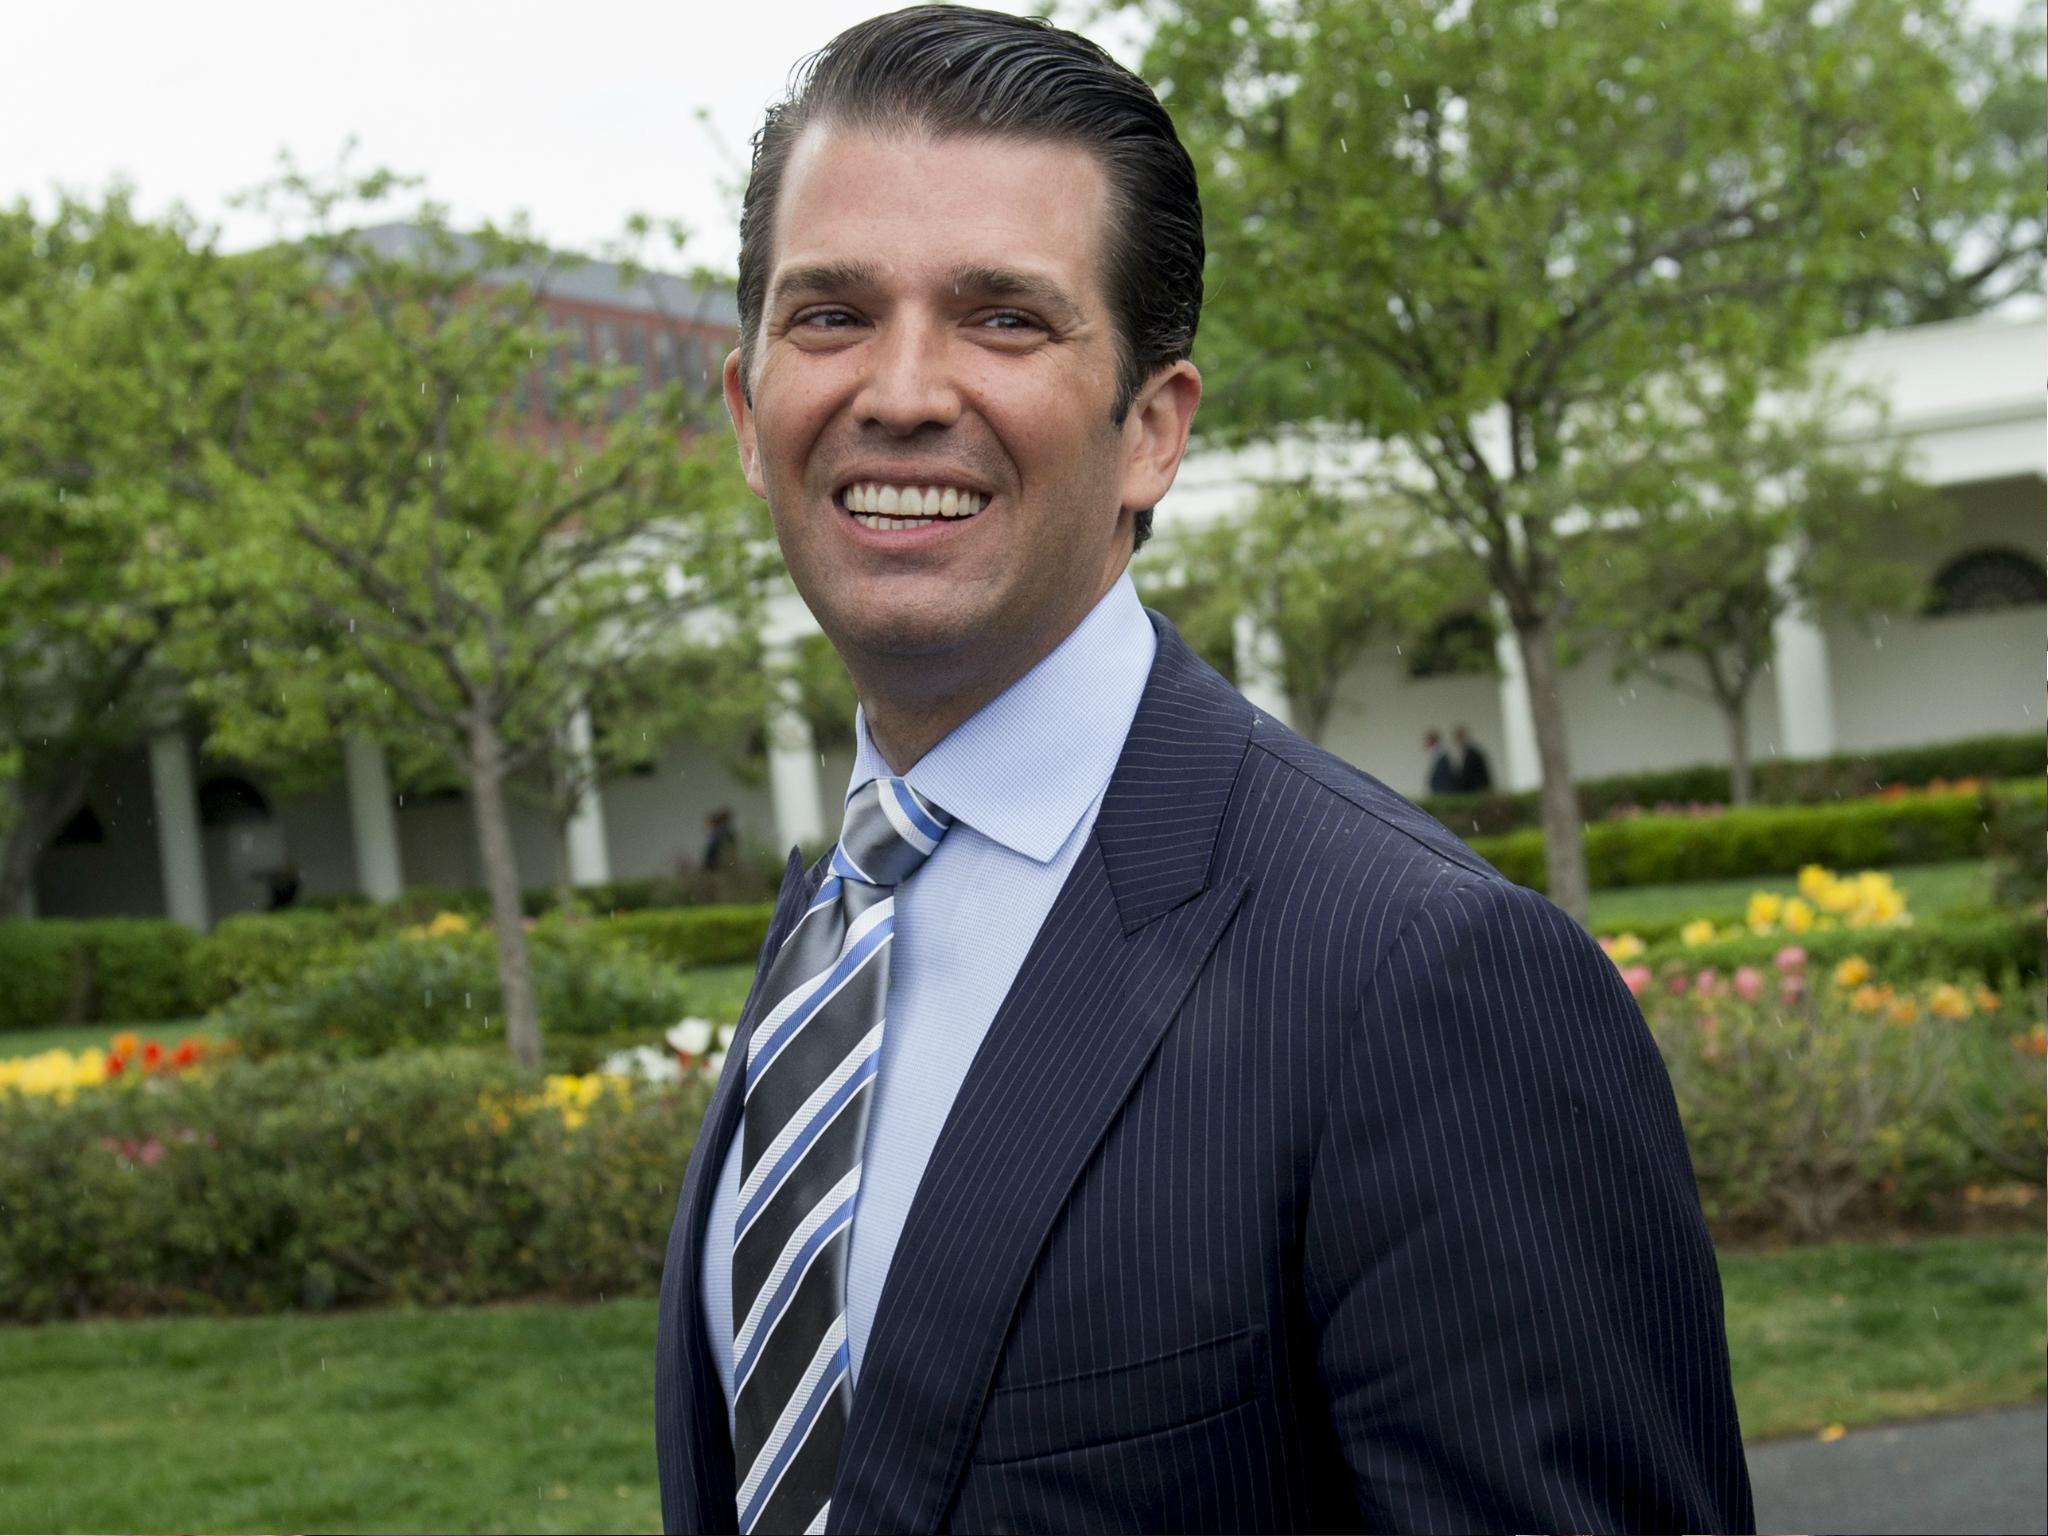 Mr Trump Jr has become famed for his social media blunders over the years